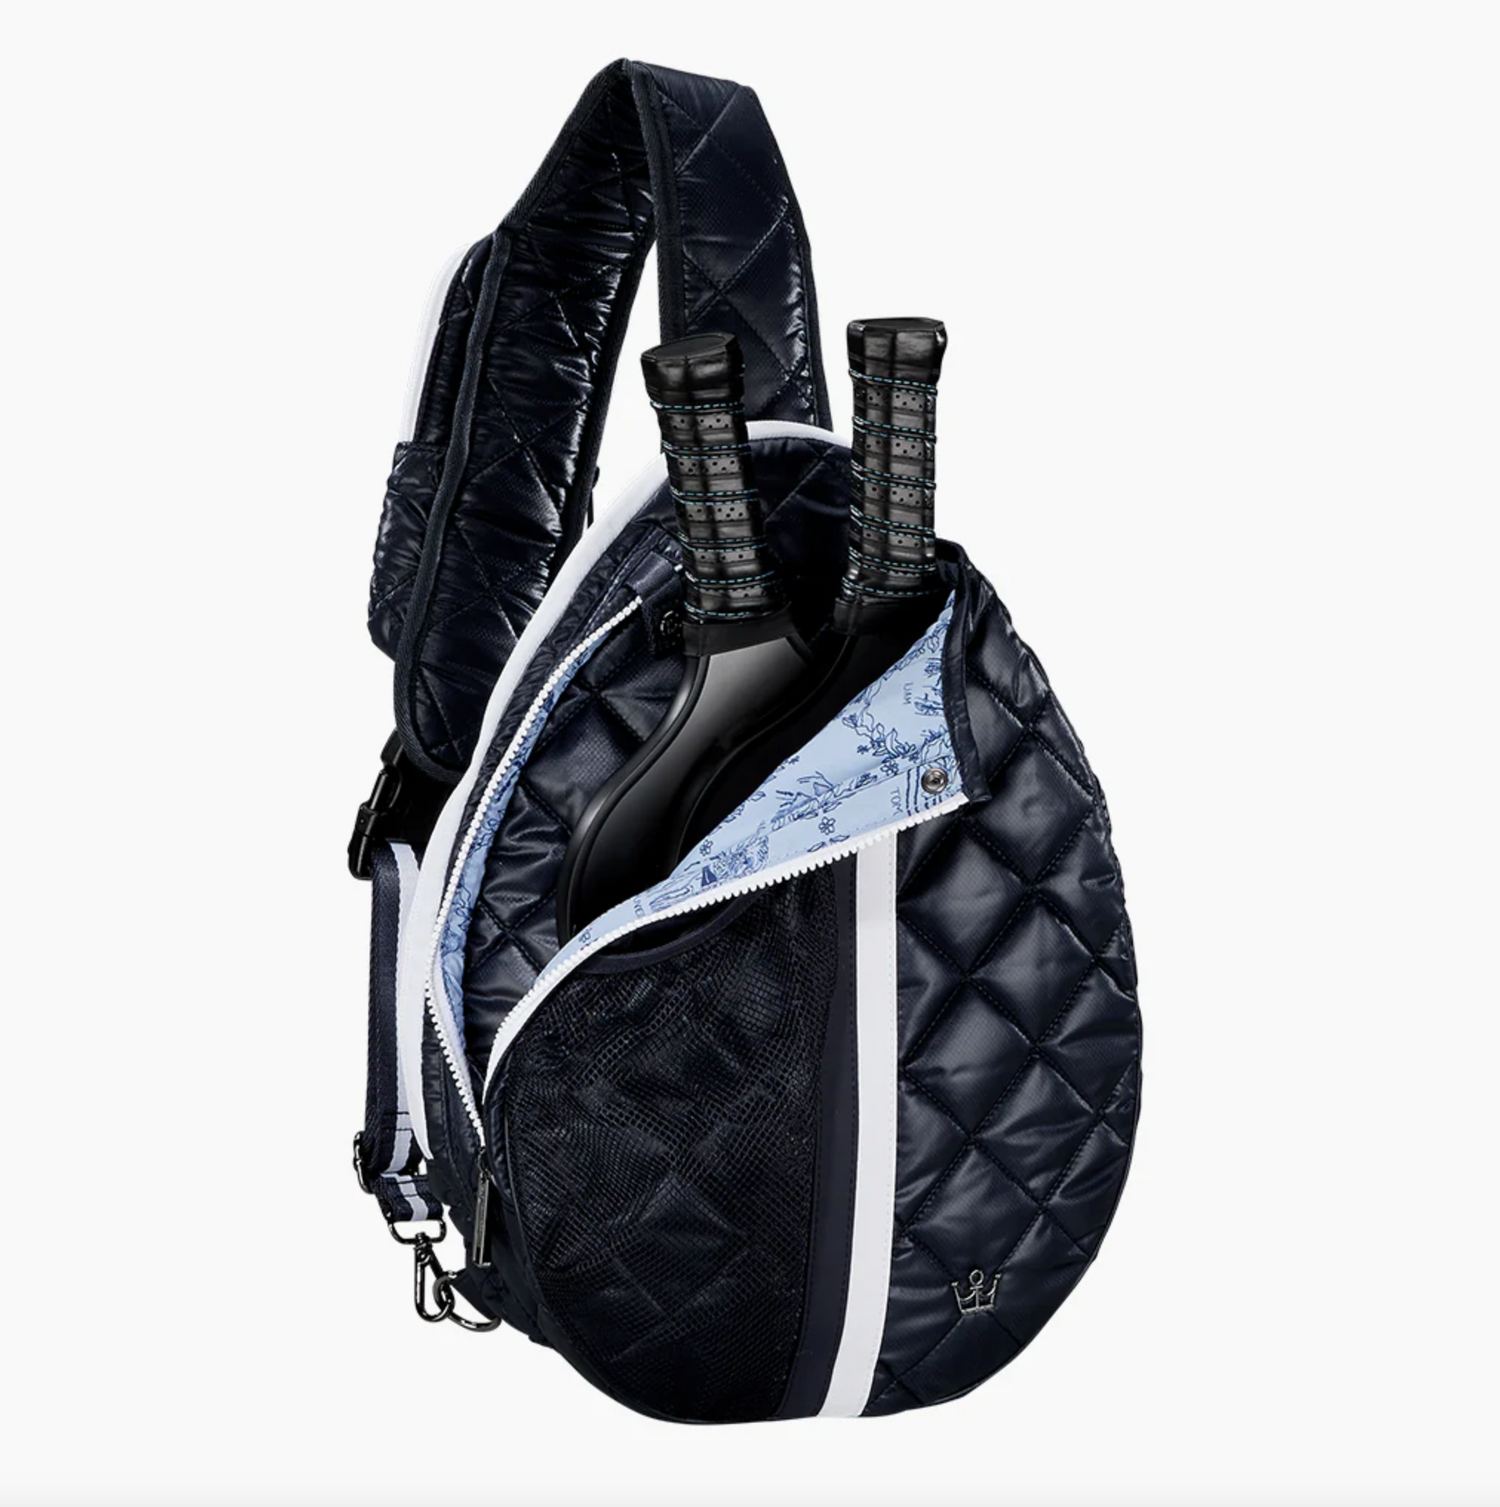 Oliver Thomas Maxed Out Pickle/Tennis Sling Backpacks in Navy White Stripe at Wrapsody